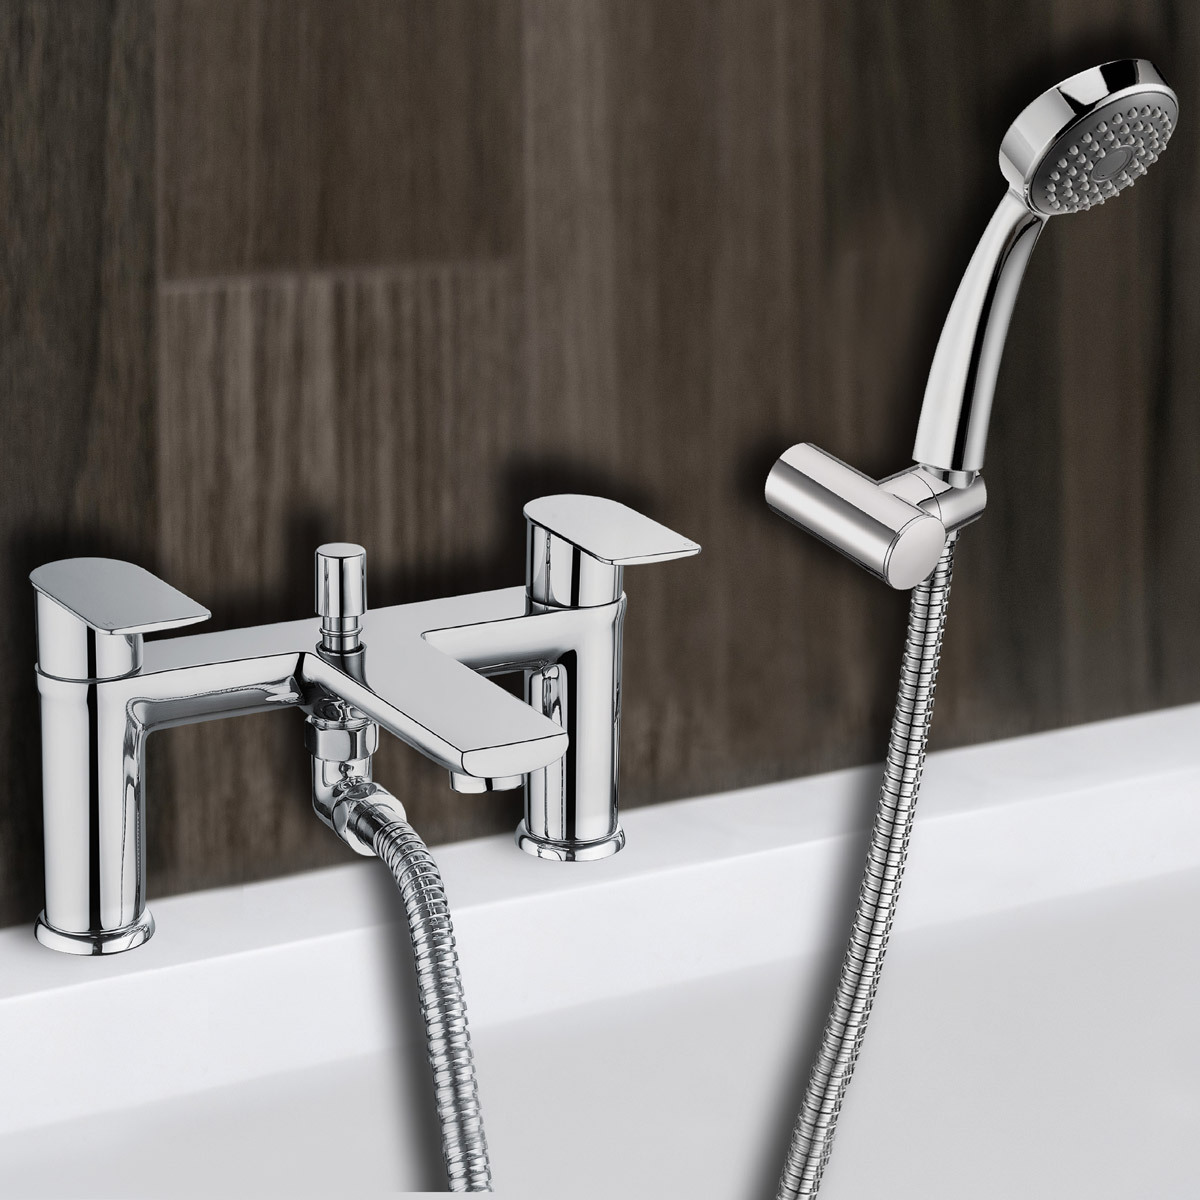 Lifestyle image of tap in bathroom setting